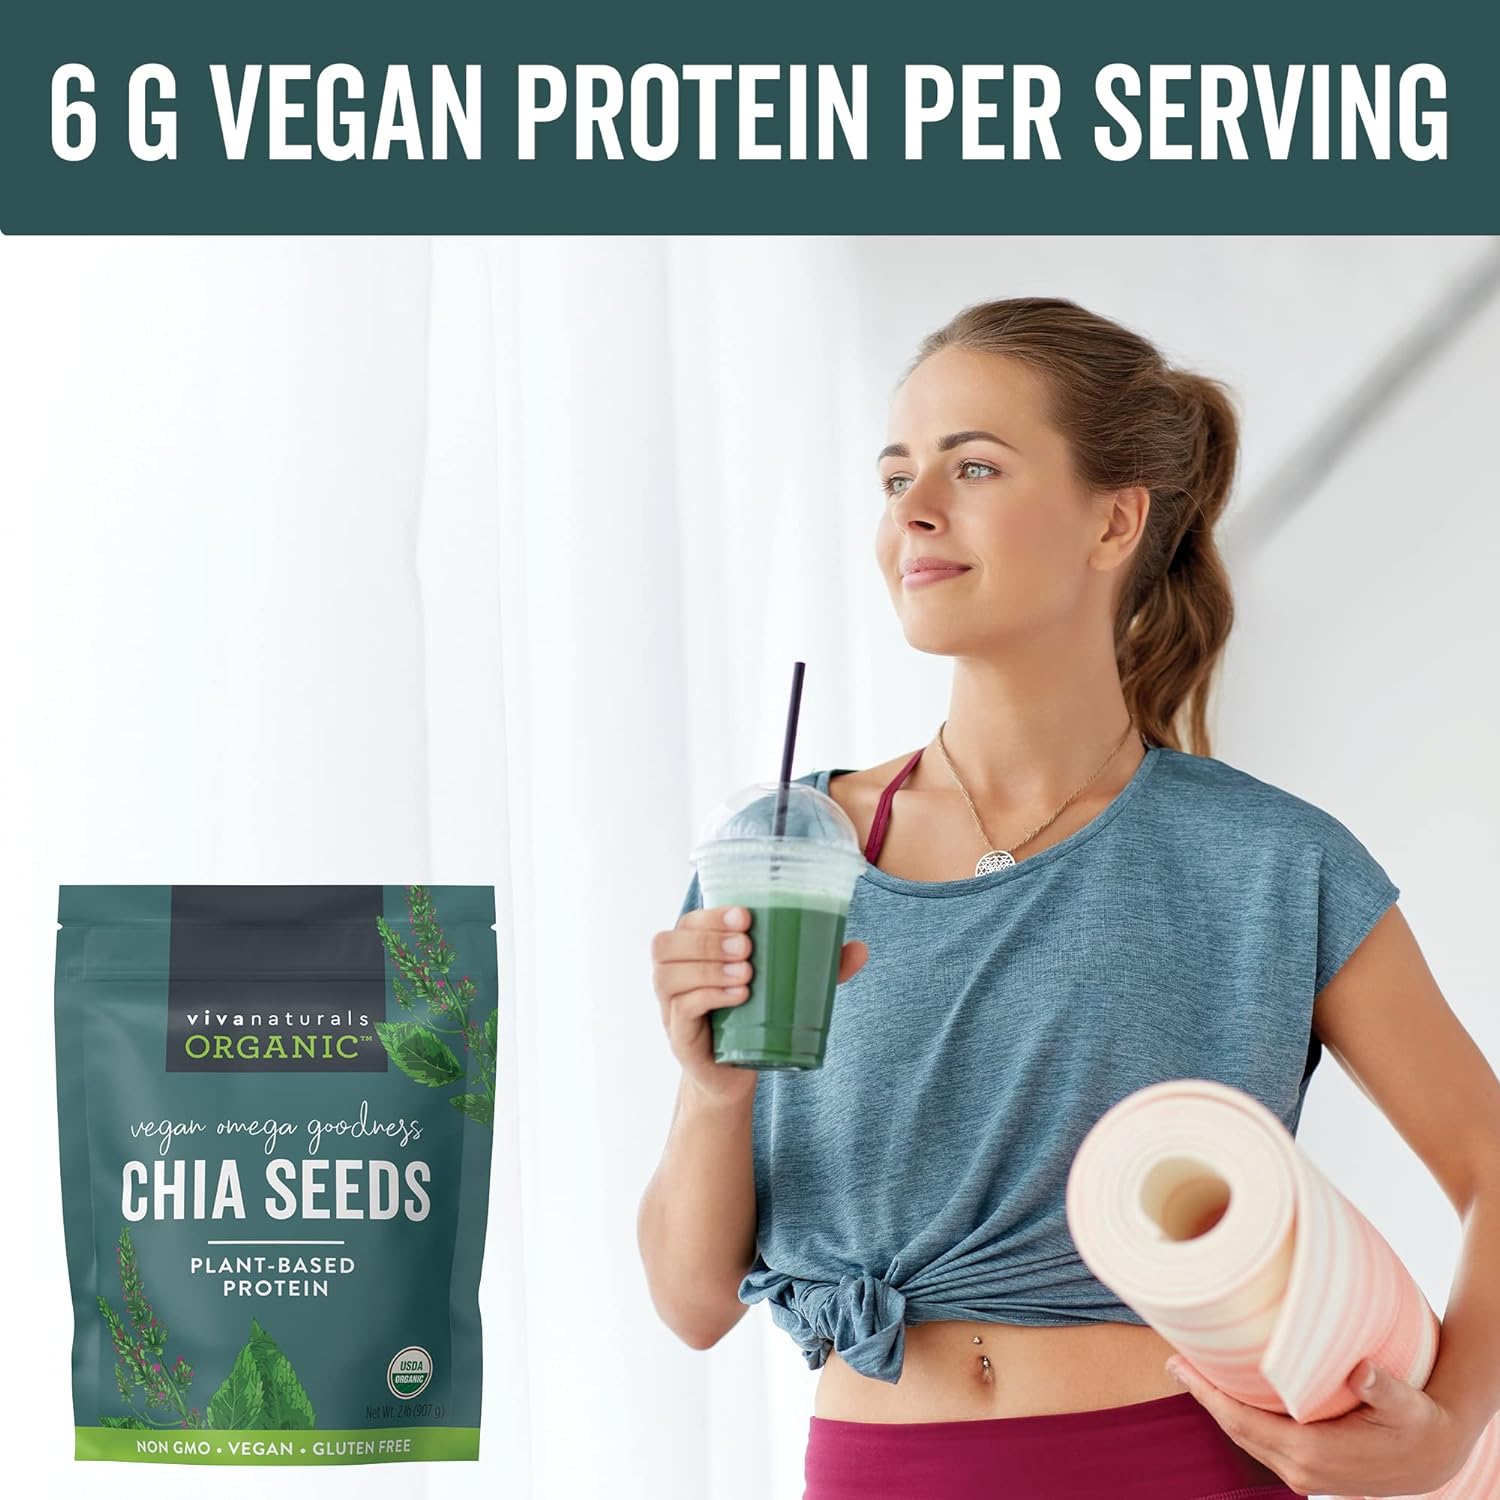 Viva Naturals Organic Chia Seeds - Plant-Based Omegas 3 and Vegan Protein, Perfect for Smoothies, Salads and Chia Puddings, Certified Non-GMO and USDA Organic, 2 lb (907 g)